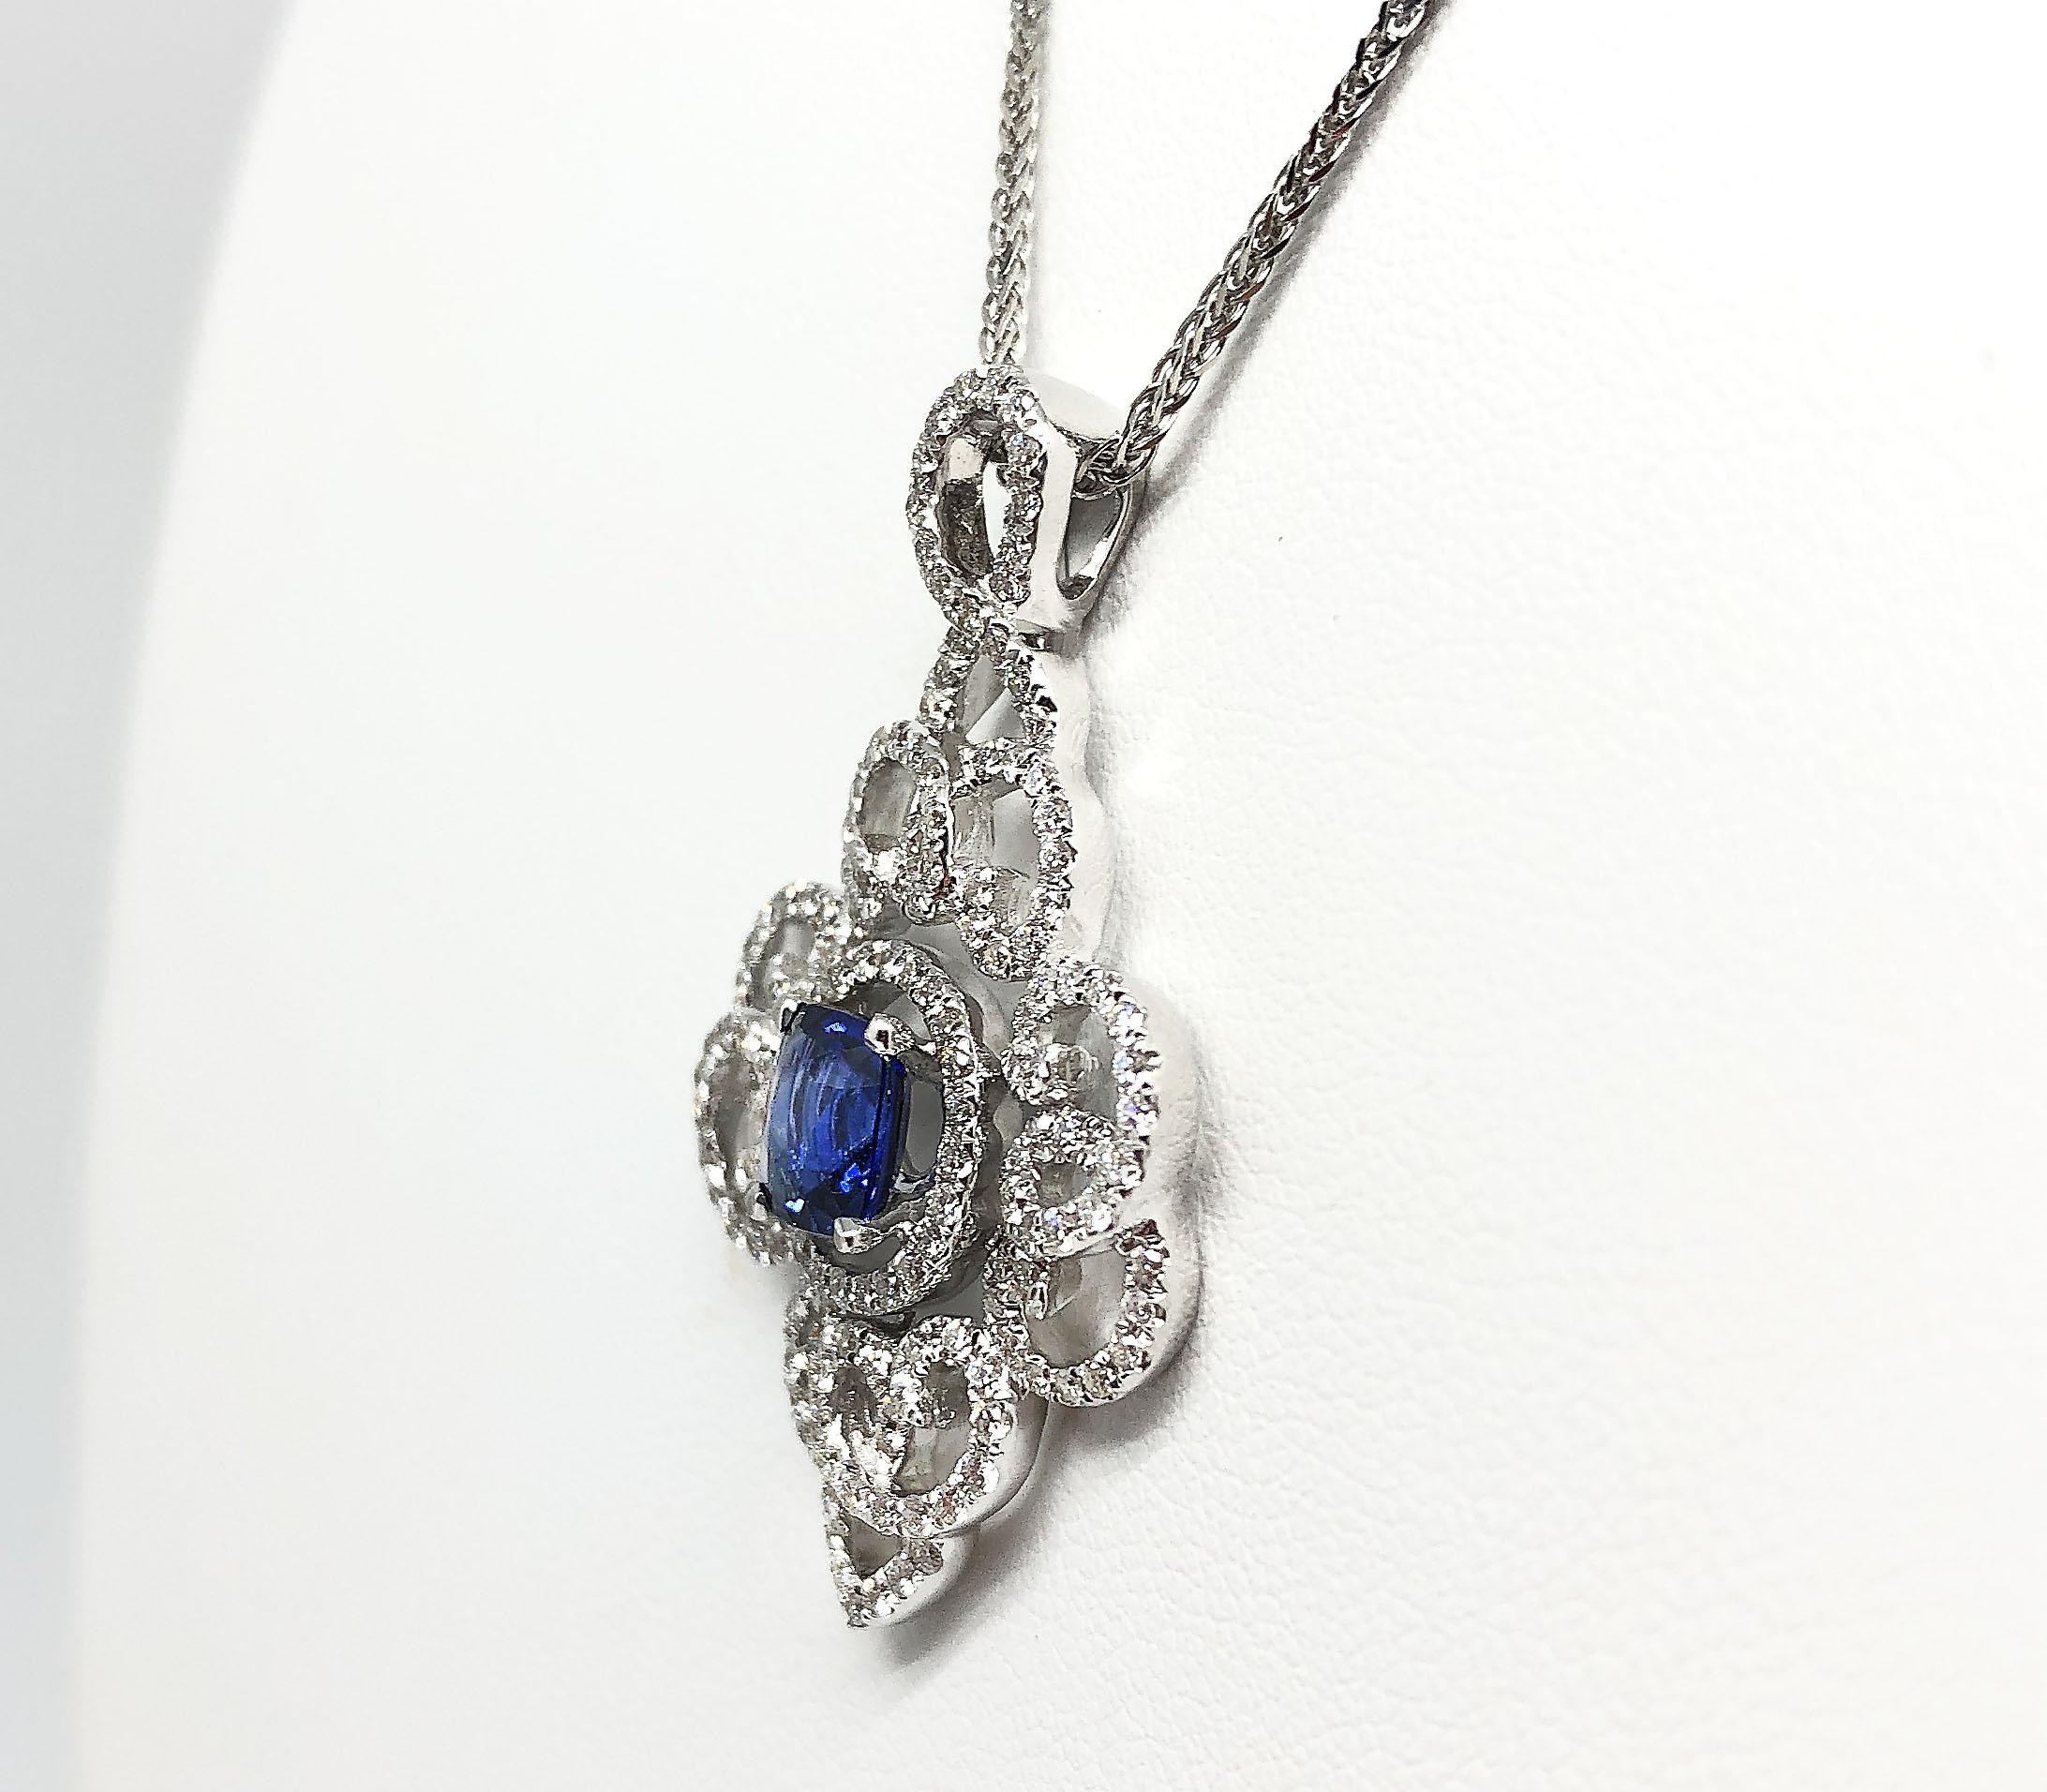 This beautiful pendant features a good luster Blue Sapphire in the centre which weighs 1.22 Carat, accompanied by 0.91 Carat of diamonds set in 18K White Gold.

*Chain not included
